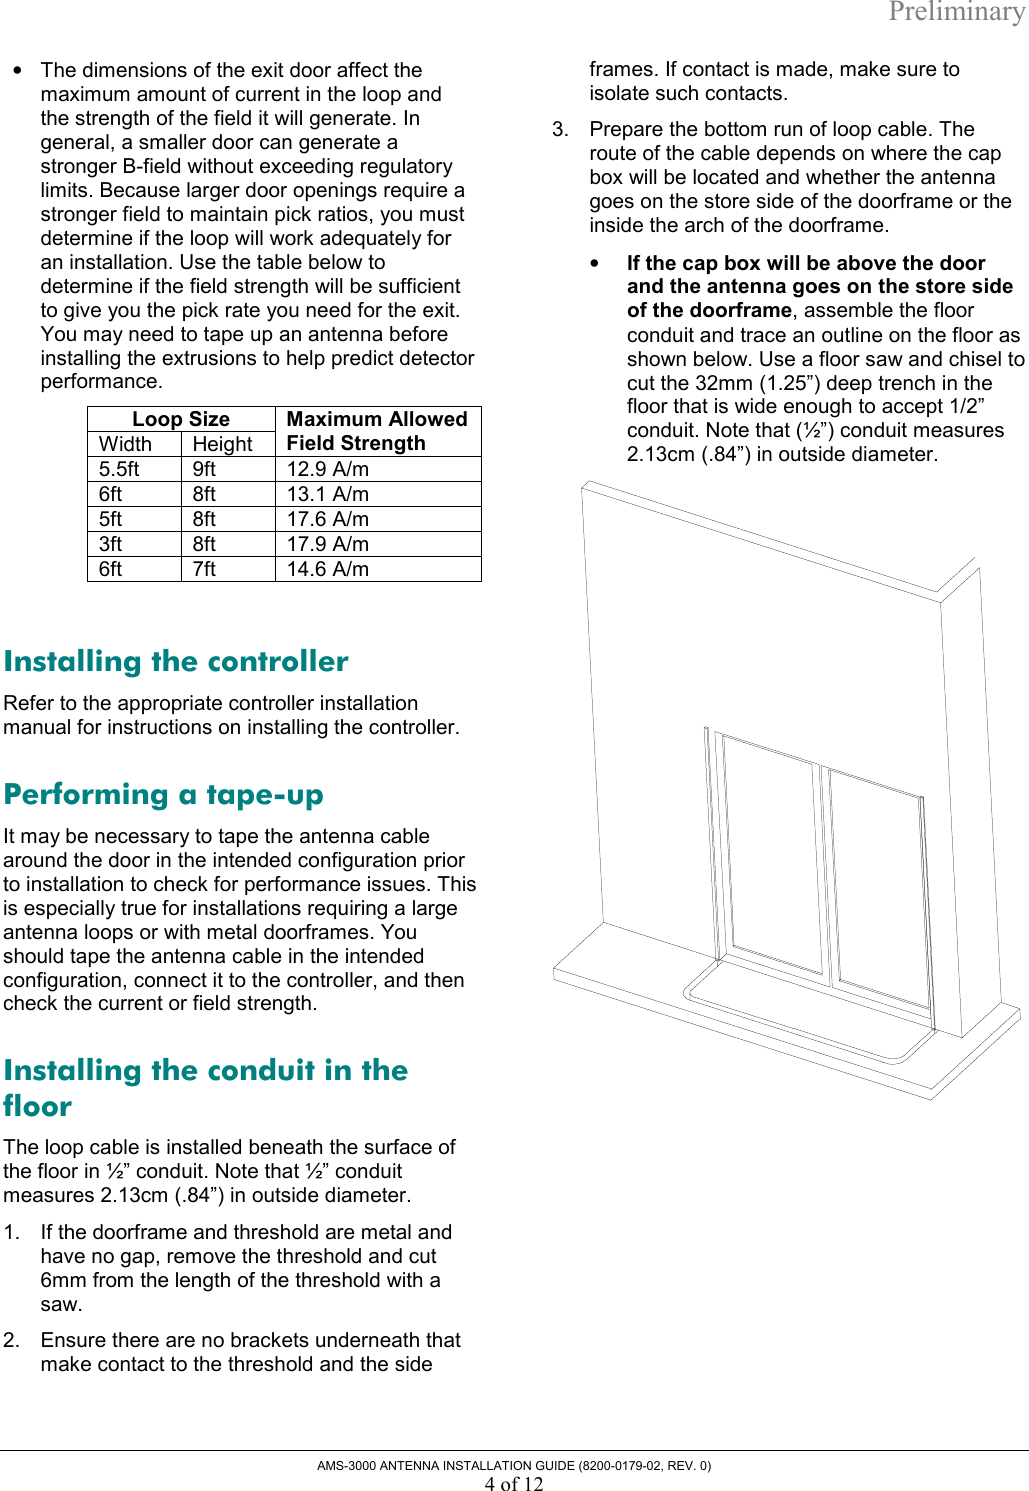 Preliminary AMS-3000 ANTENNA INSTALLATION GUIDE (8200-0179-02, REV. 0) 4 of 12 •  The dimensions of the exit door affect the maximum amount of current in the loop and the strength of the field it will generate. In general, a smaller door can generate a stronger B-field without exceeding regulatory limits. Because larger door openings require a stronger field to maintain pick ratios, you must determine if the loop will work adequately for an installation. Use the table below to determine if the field strength will be sufficient to give you the pick rate you need for the exit. You may need to tape up an antenna before installing the extrusions to help predict detector performance.  Loop Size Width Height Maximum Allowed Field Strength 5.5ft   9ft  12.9 A/m 6ft 8ft 13.1 A/m 5ft 8ft 17.6 A/m 3ft 8ft 17.9 A/m 6ft 7ft 14.6 A/m  Installing the controller Refer to the appropriate controller installation manual for instructions on installing the controller. Performing a tape-up It may be necessary to tape the antenna cable around the door in the intended configuration prior to installation to check for performance issues. This is especially true for installations requiring a large antenna loops or with metal doorframes. You should tape the antenna cable in the intended configuration, connect it to the controller, and then check the current or field strength. Installing the conduit in the floor The loop cable is installed beneath the surface of the floor in ½” conduit. Note that ½” conduit measures 2.13cm (.84”) in outside diameter. 1.  If the doorframe and threshold are metal and have no gap, remove the threshold and cut 6mm from the length of the threshold with a saw.  2.  Ensure there are no brackets underneath that make contact to the threshold and the side frames. If contact is made, make sure to isolate such contacts. 3.  Prepare the bottom run of loop cable. The route of the cable depends on where the cap box will be located and whether the antenna goes on the store side of the doorframe or the inside the arch of the doorframe. •  If the cap box will be above the door and the antenna goes on the store side of the doorframe, assemble the floor conduit and trace an outline on the floor as shown below. Use a floor saw and chisel to cut the 32mm (1.25”) deep trench in the floor that is wide enough to accept 1/2” conduit. Note that (½”) conduit measures 2.13cm (.84”) in outside diameter.   